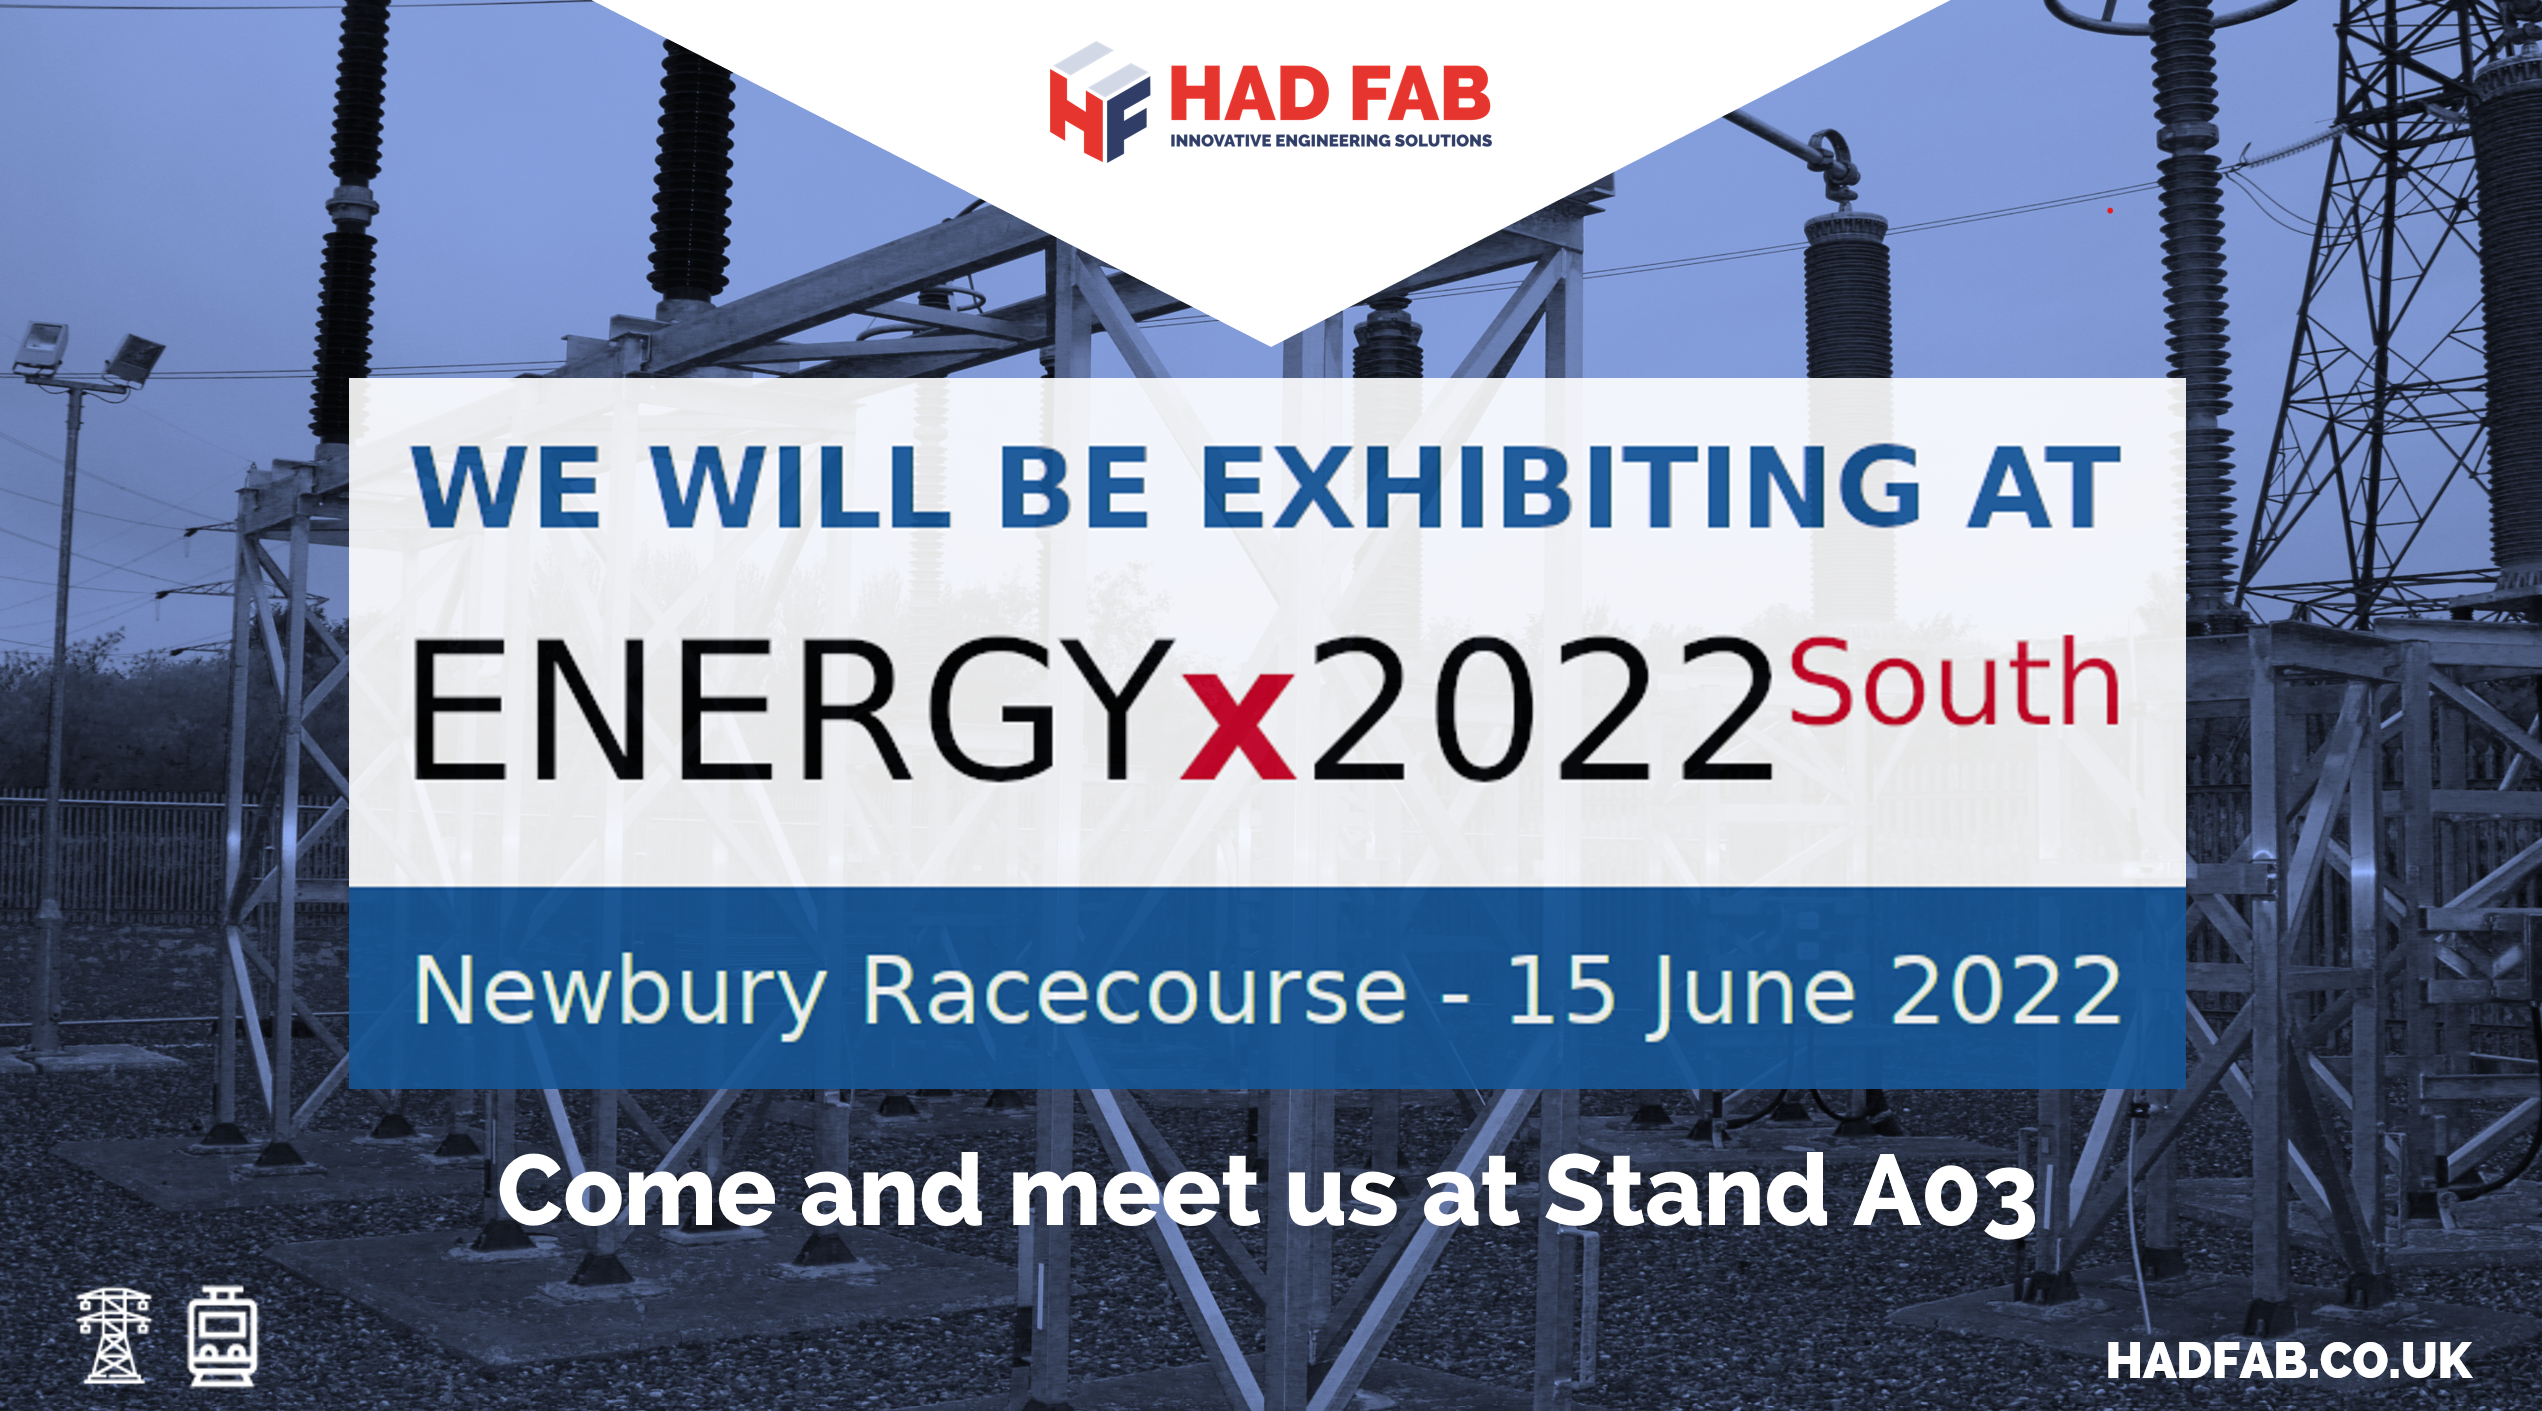 HAD FAB ARE EXHIBITING AT ENERGY X 2022 AT THE NEWBURY RACECOURSE 15 JUNE 2022